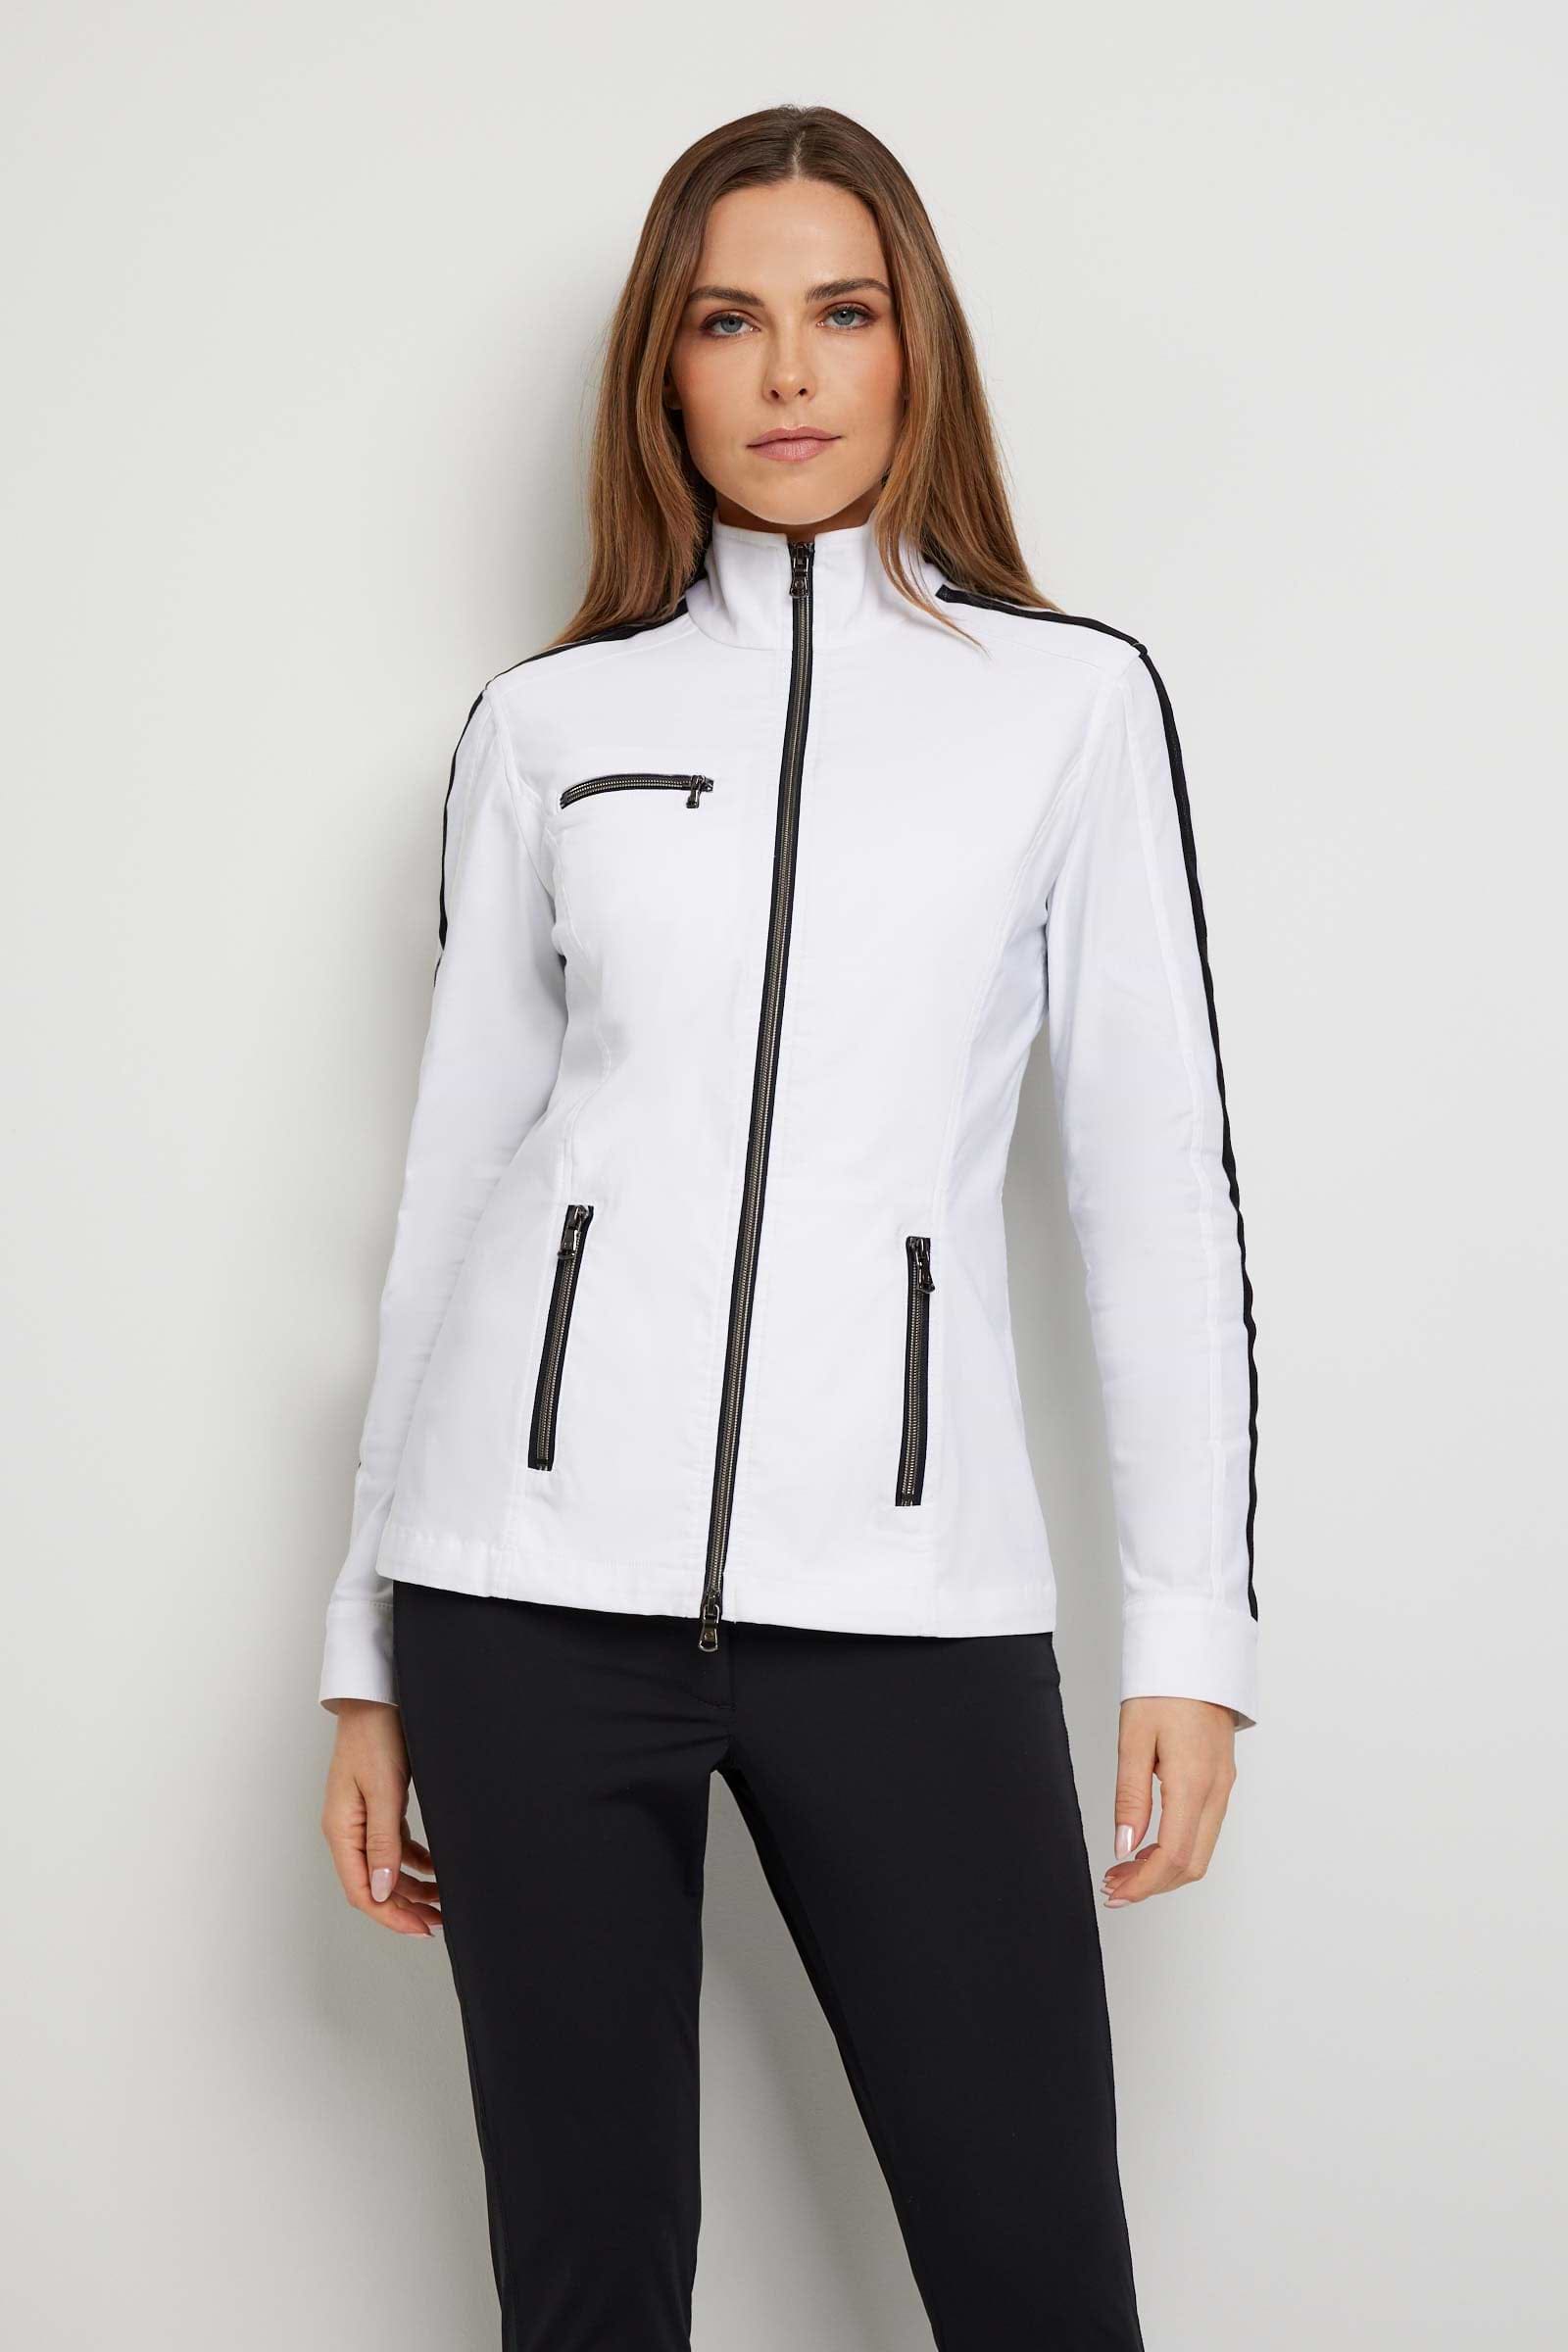 The Best Travel Jacket. Woman Showing the Front Profile of a Justine Jacket in White.